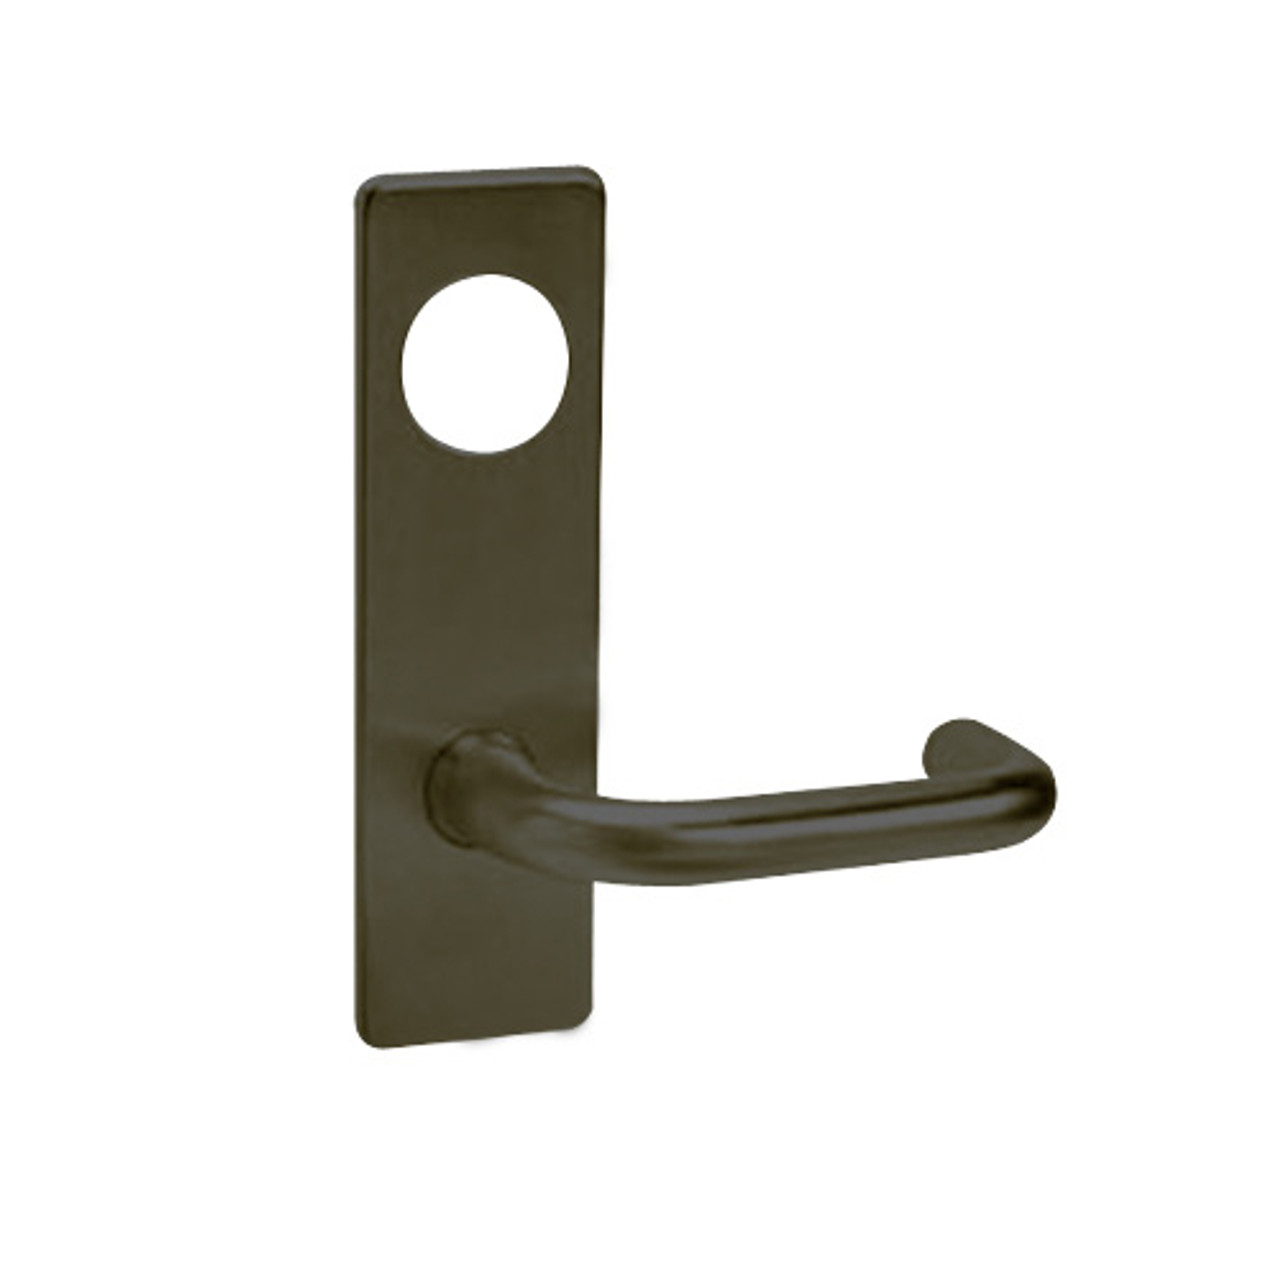 ML2048-LWM-613-M31 Corbin Russwin ML2000 Series Mortise Entrance Trim Pack with Lustra Lever in Oil Rubbed Bronze